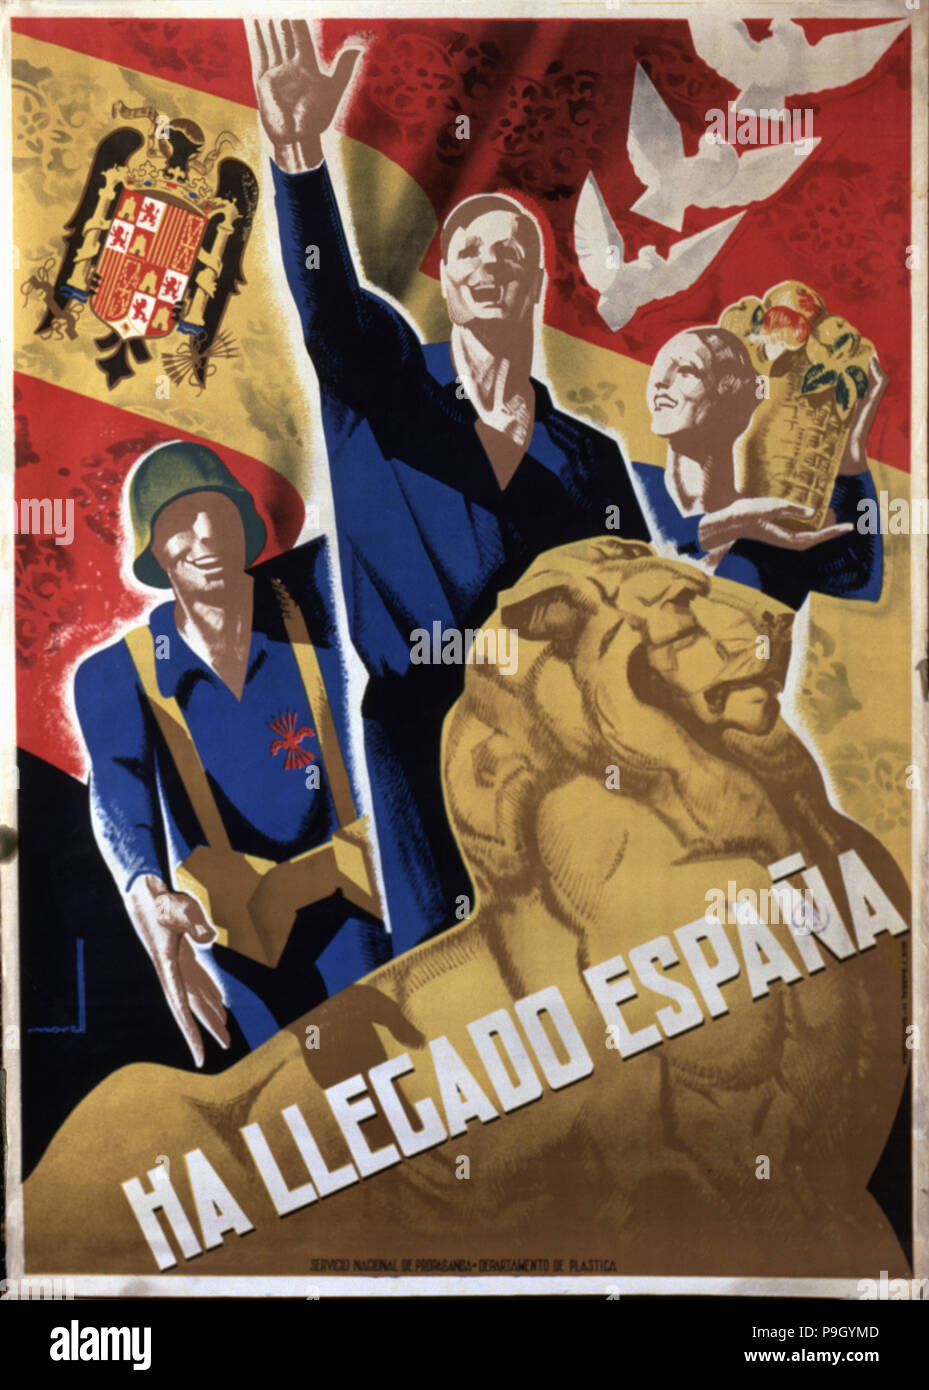 Spanish Civil War (1936 - 1939), 'Spain has arrived', poster published by the National Service of… Stock Photo